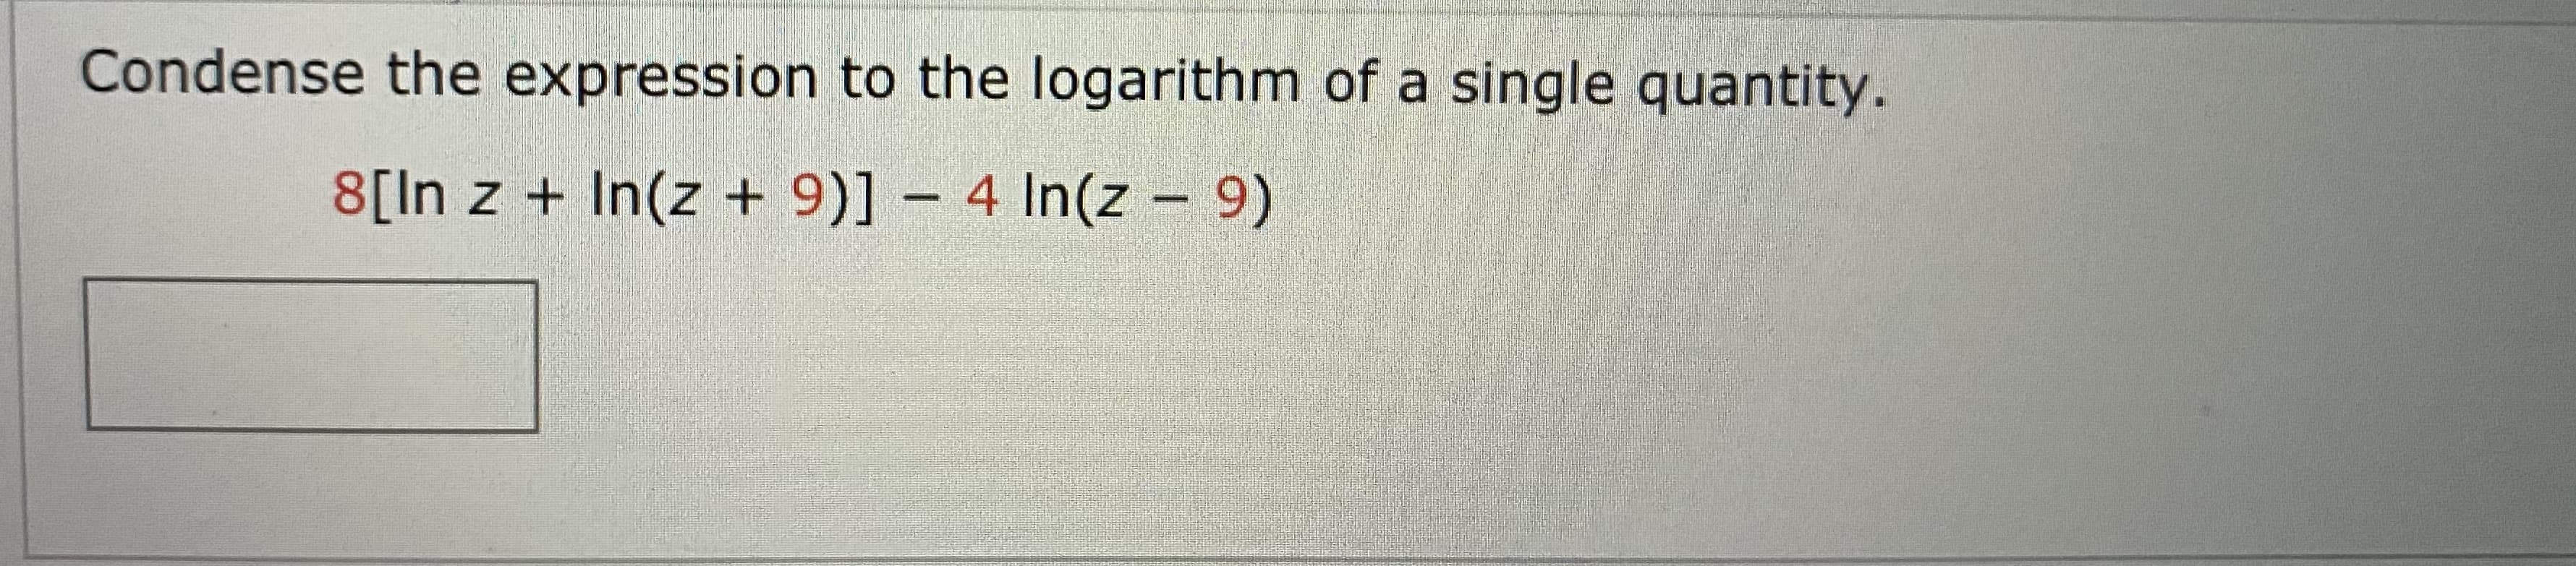 Condense the expression to the logarithm of a single quantity.
8[In z + In(z + 9)] – 4 In(z - 9)
